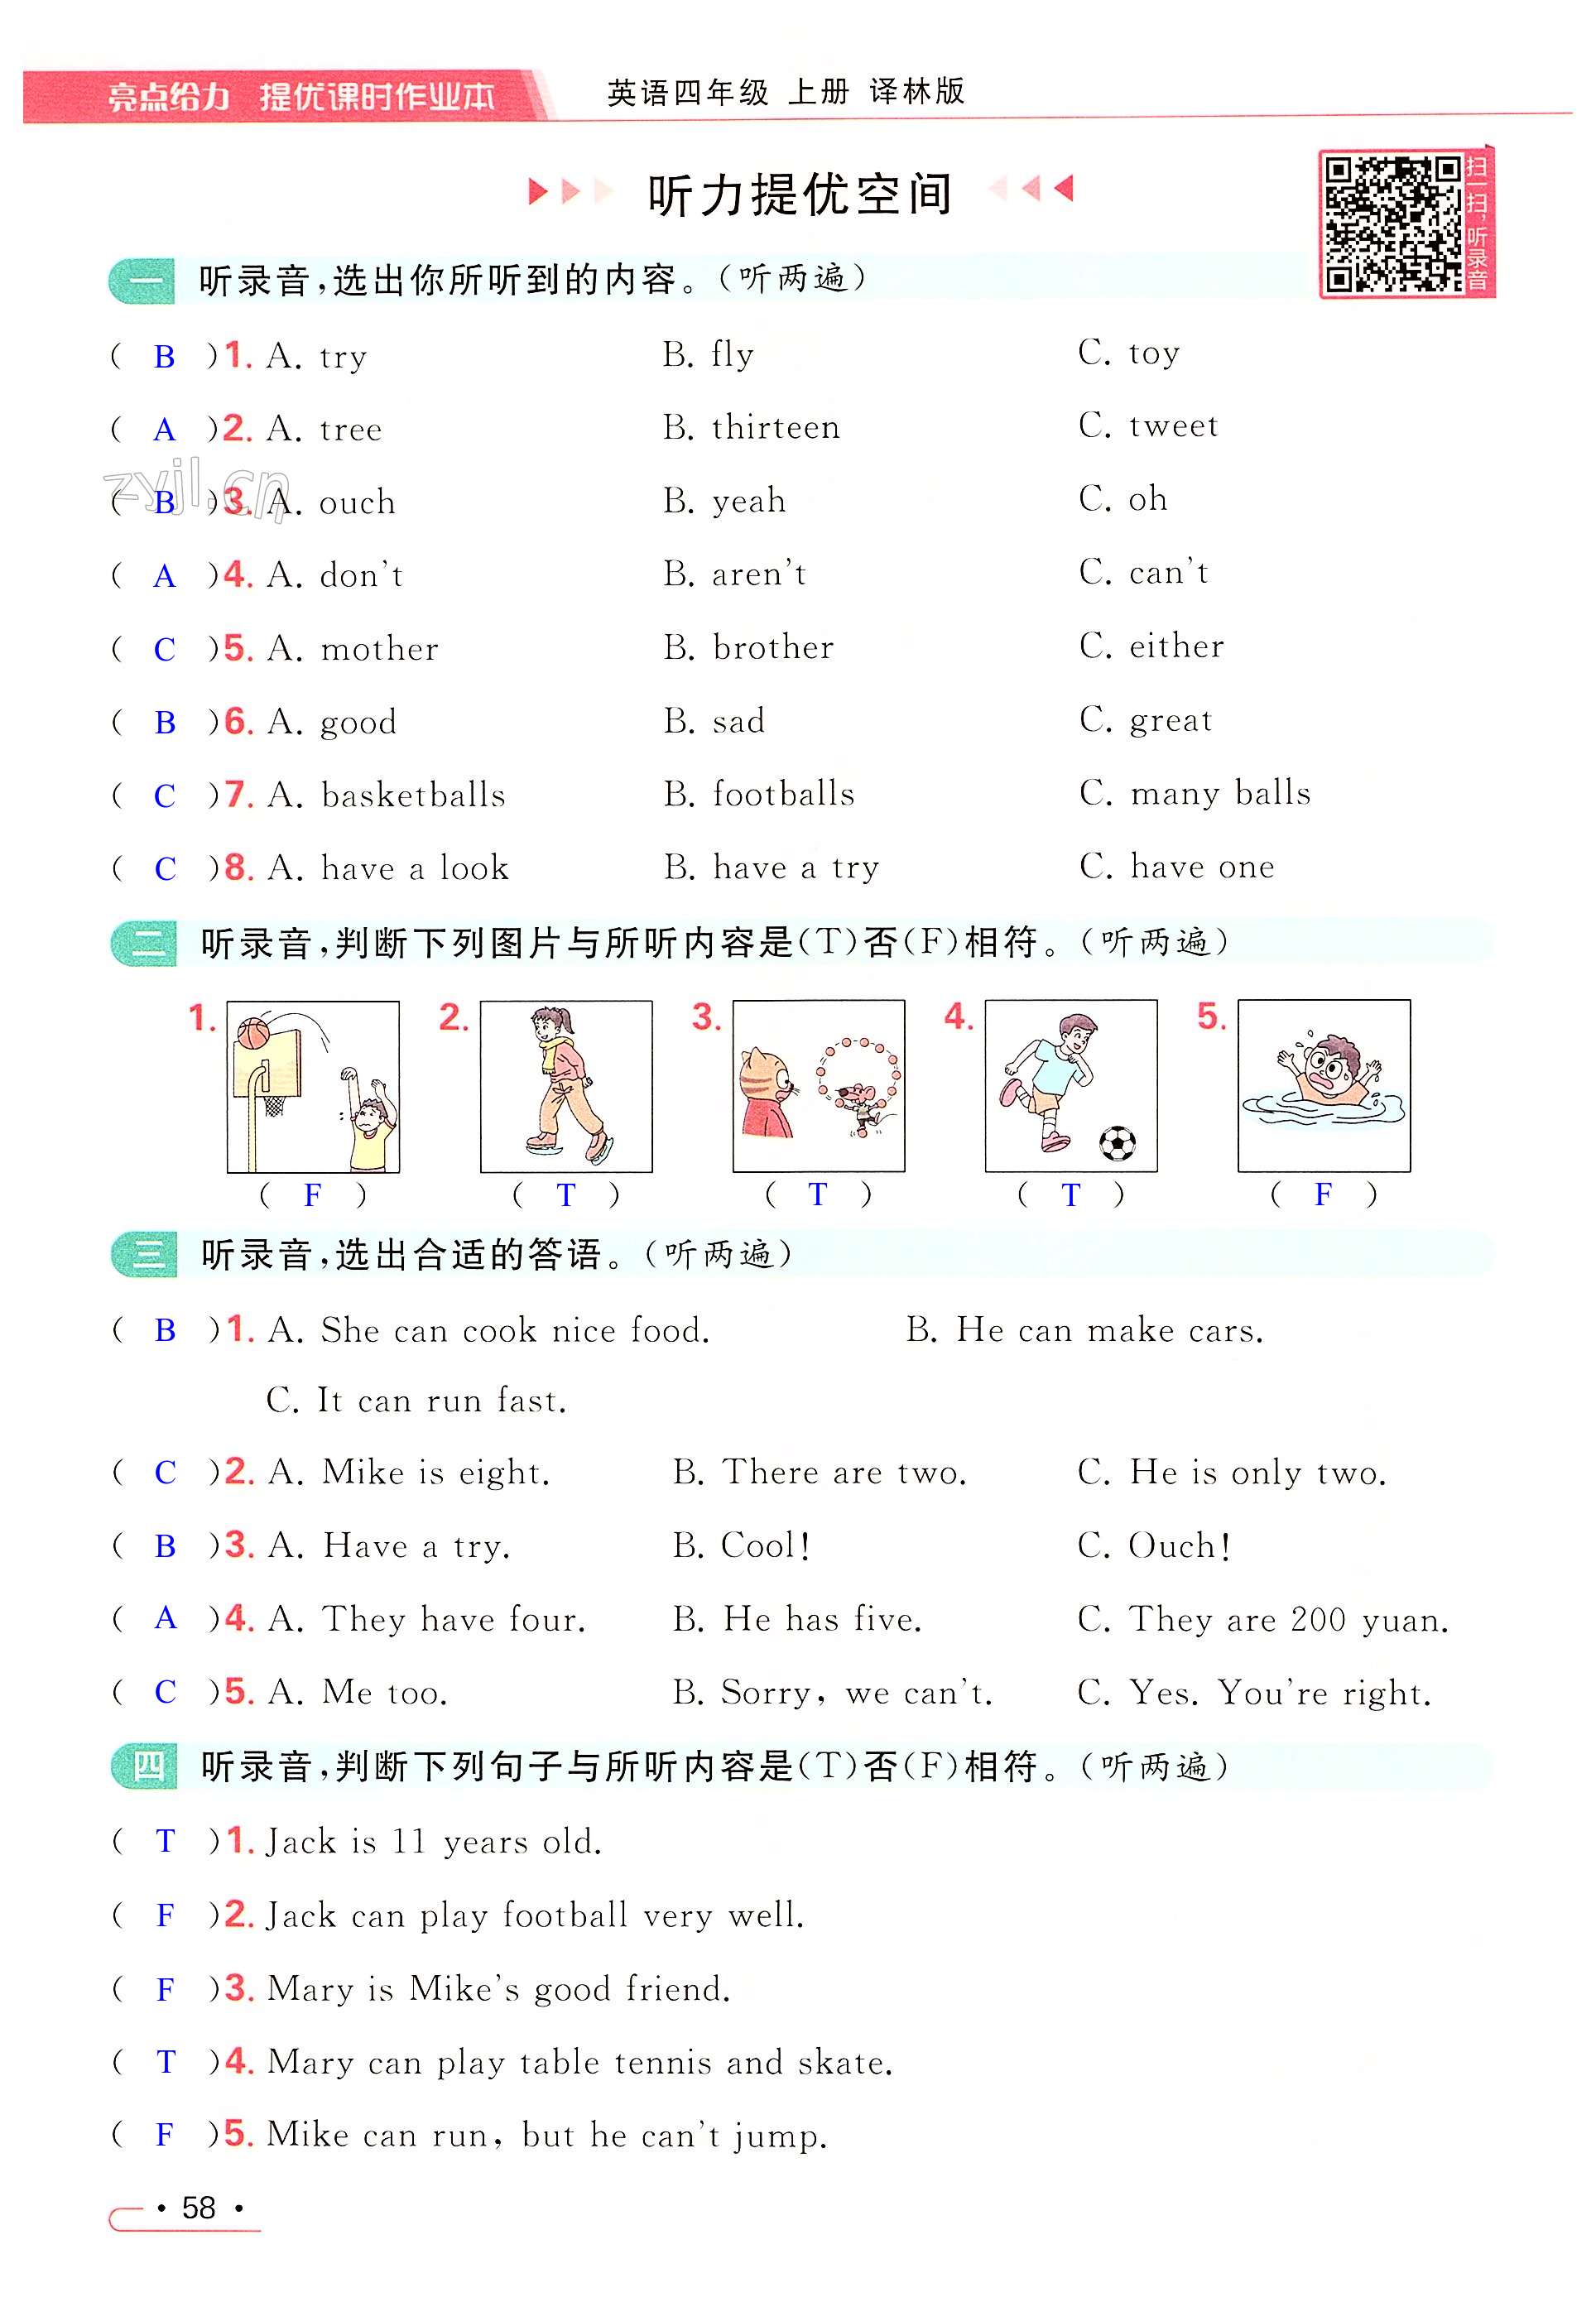 unit4 I can play basketball - 第58页